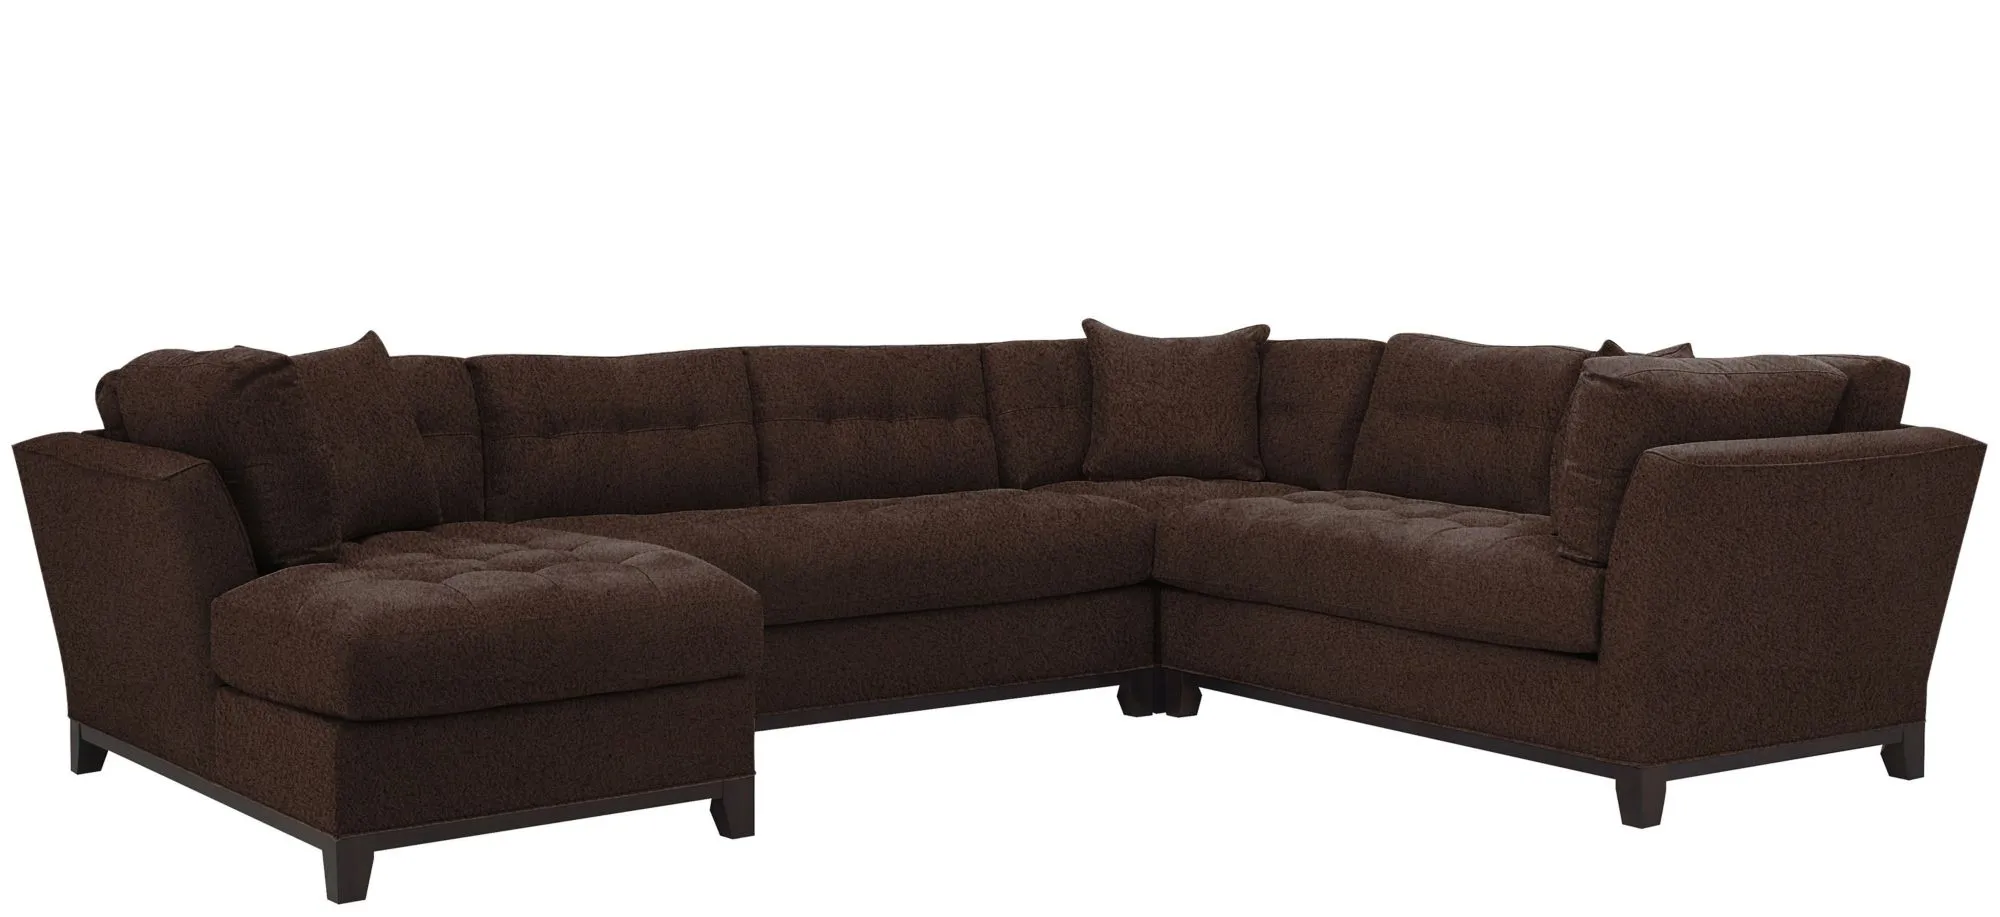 Cityscape 4-pc. Sectional in Suede So Soft Chocolate by H.M. Richards